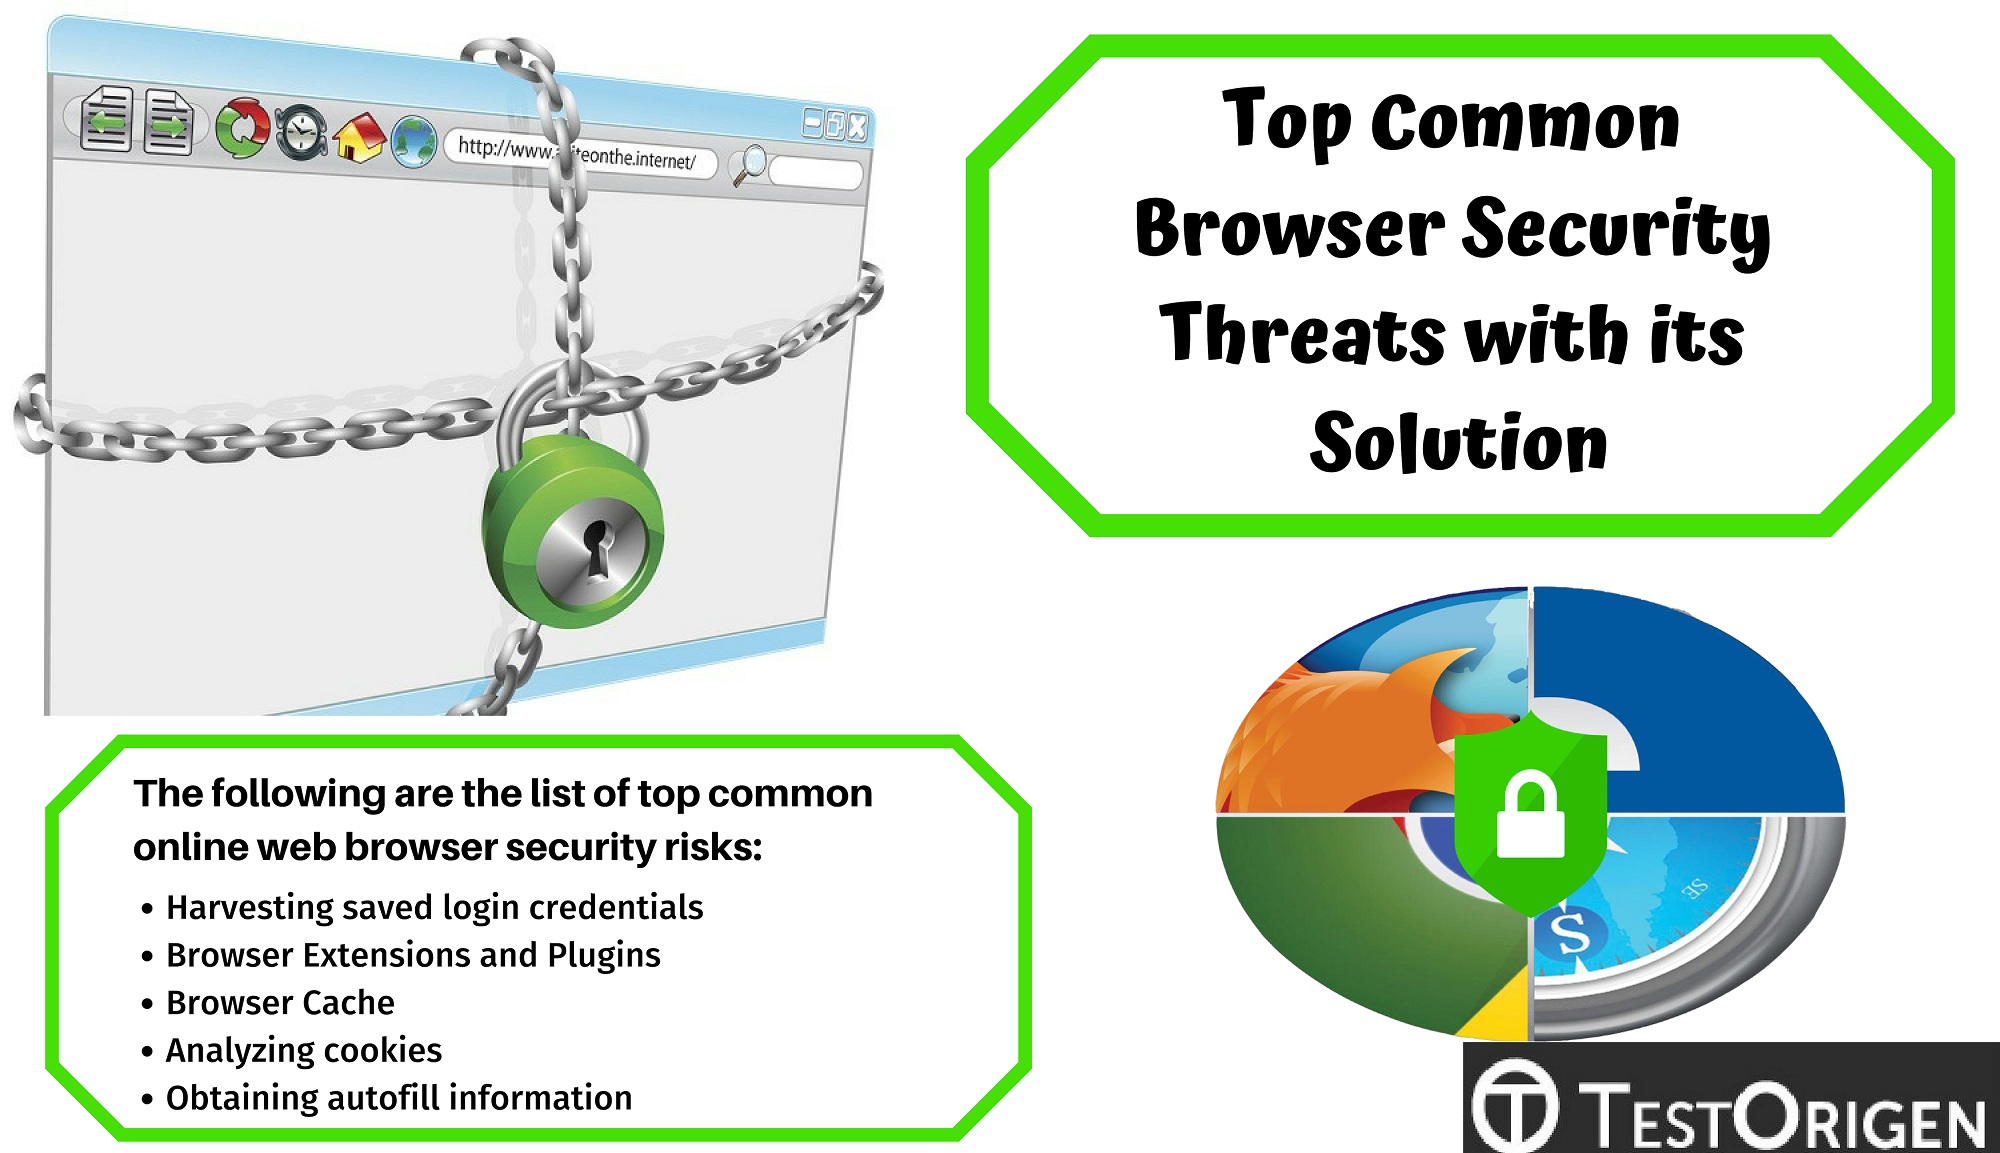 Top Common Browser Security Threats with its Solution